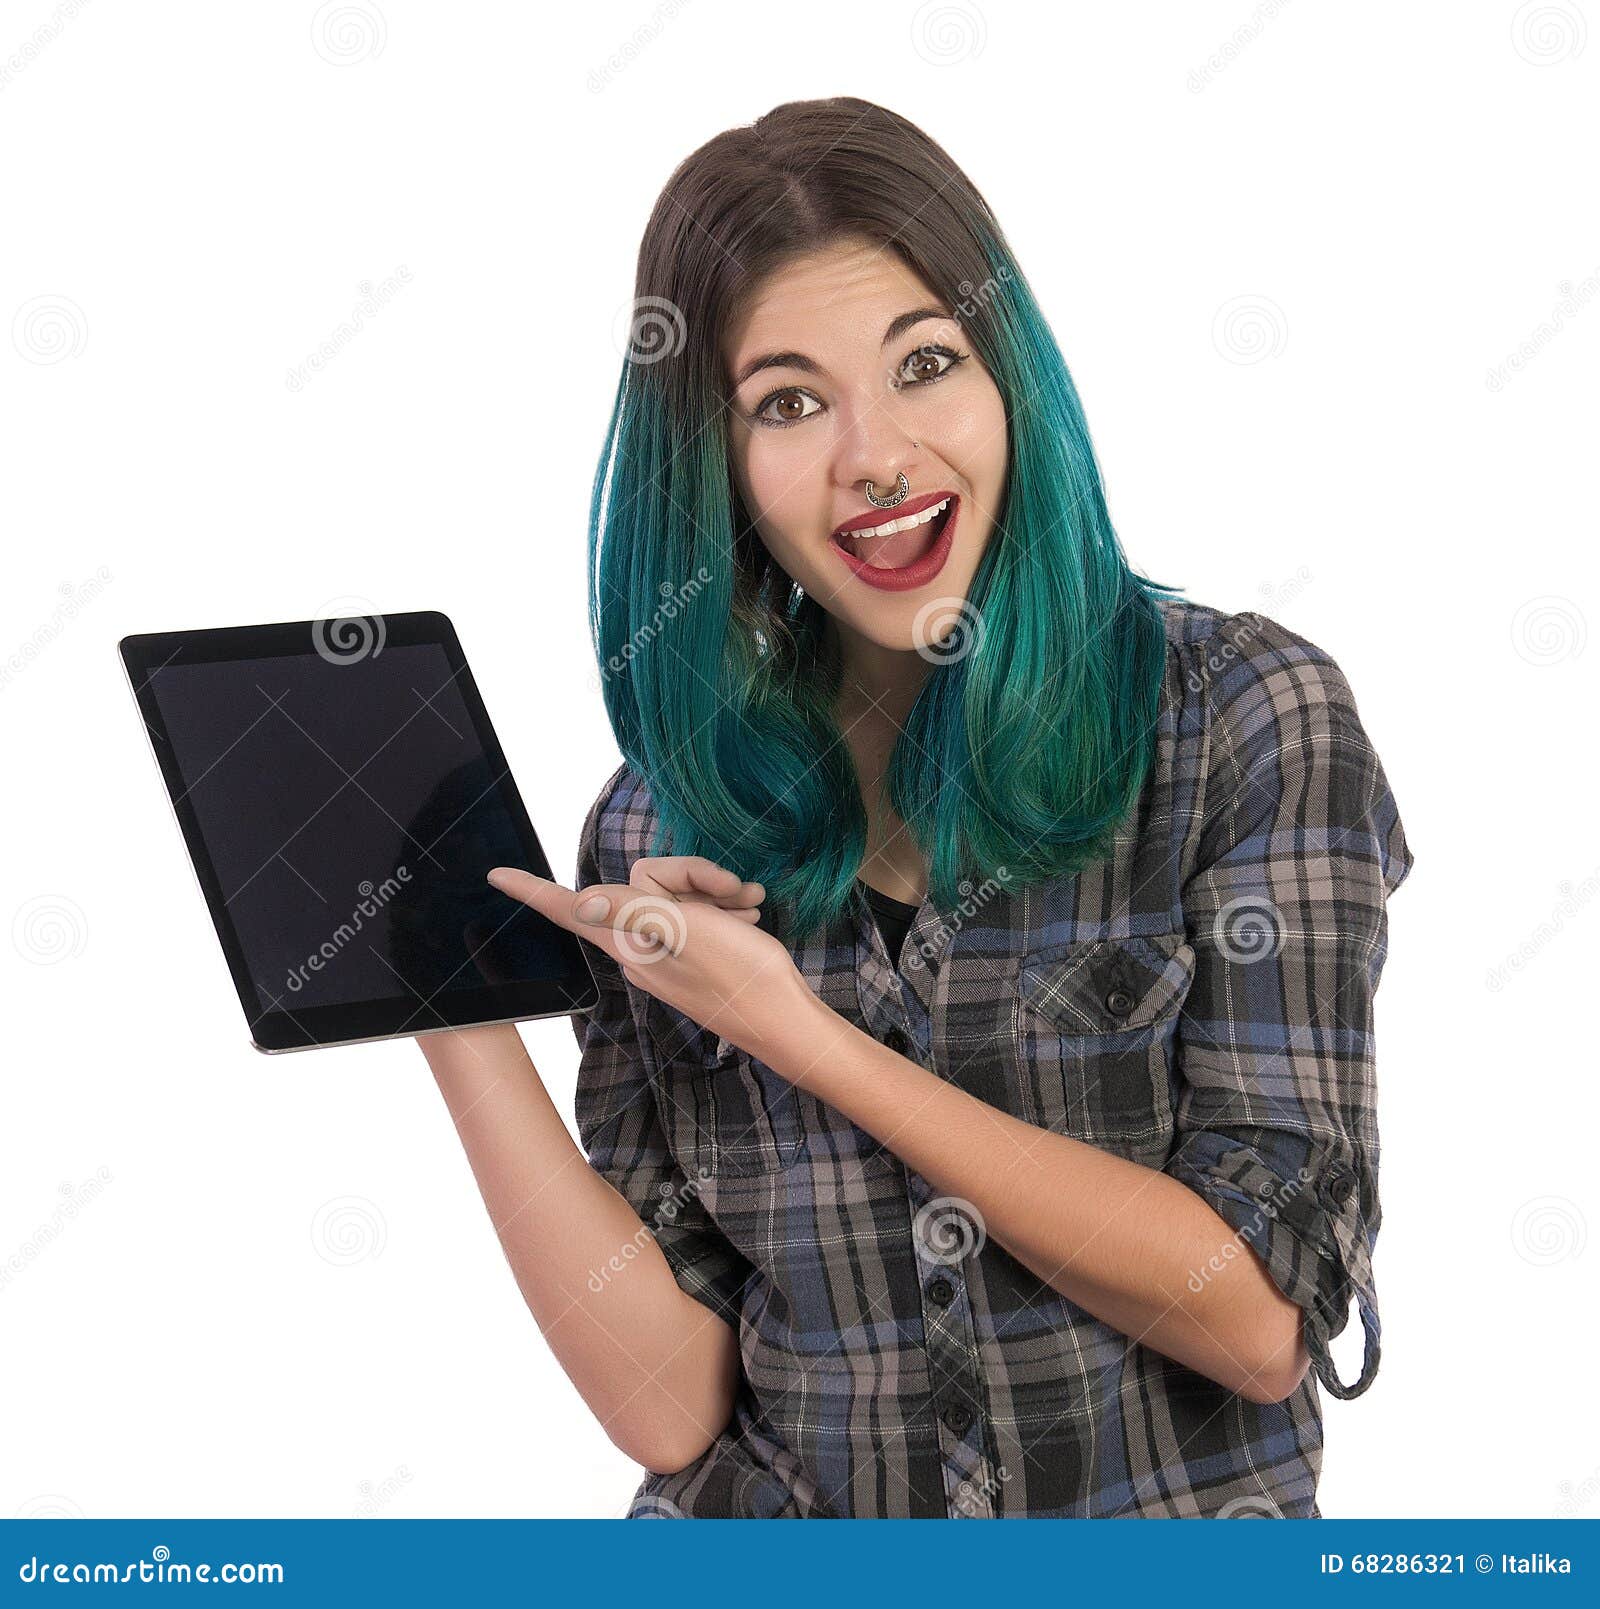 Happy and surprised girl showing you something on a digital tablet on white background. Pierced, turquoise haired and dressing up a plaid shirt.